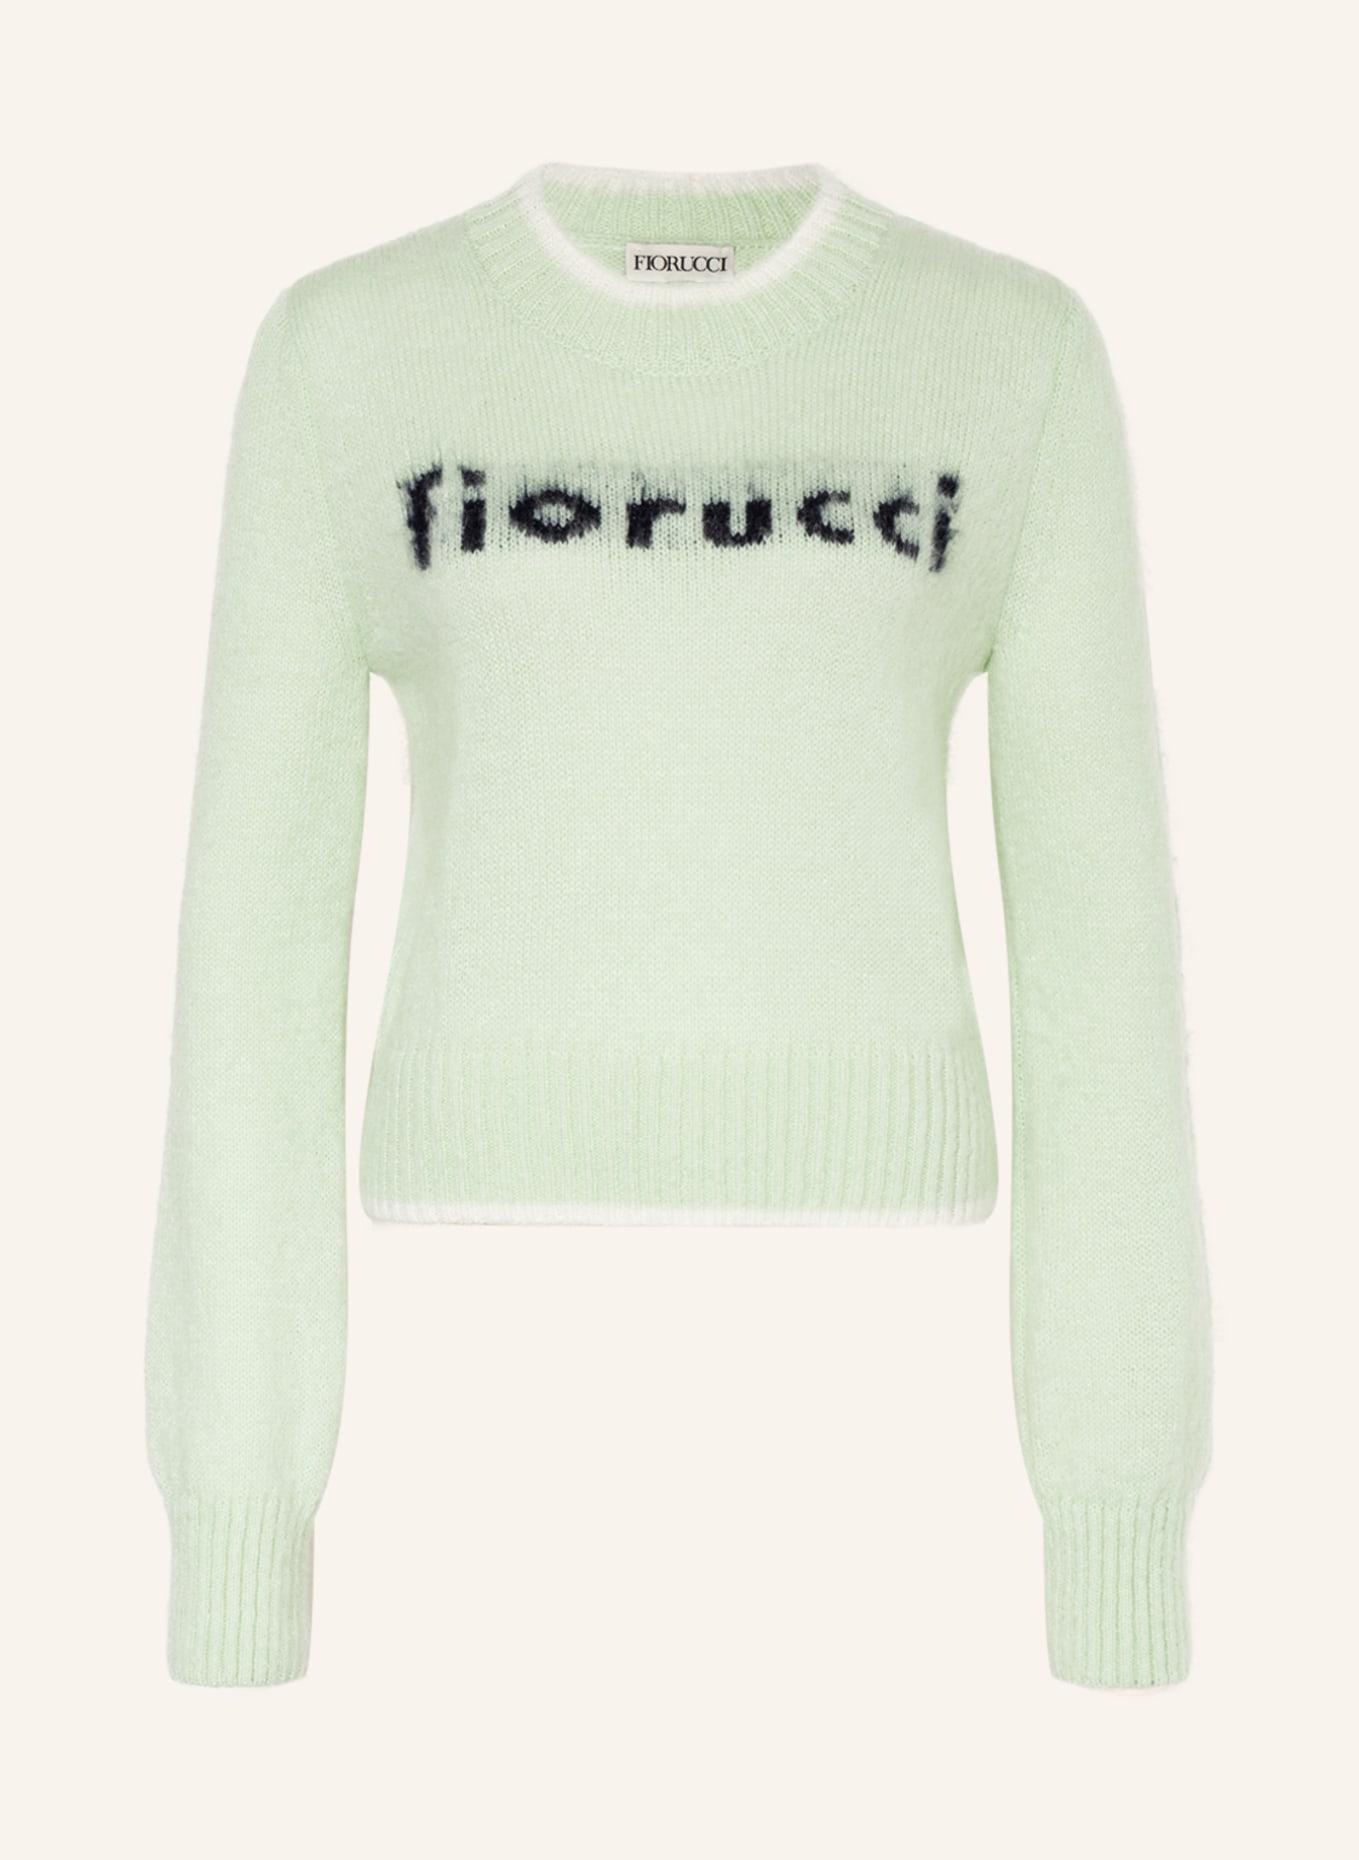 FIORUCCI Sweater with mohair, Color: LIGHT GREEN (Image 1)